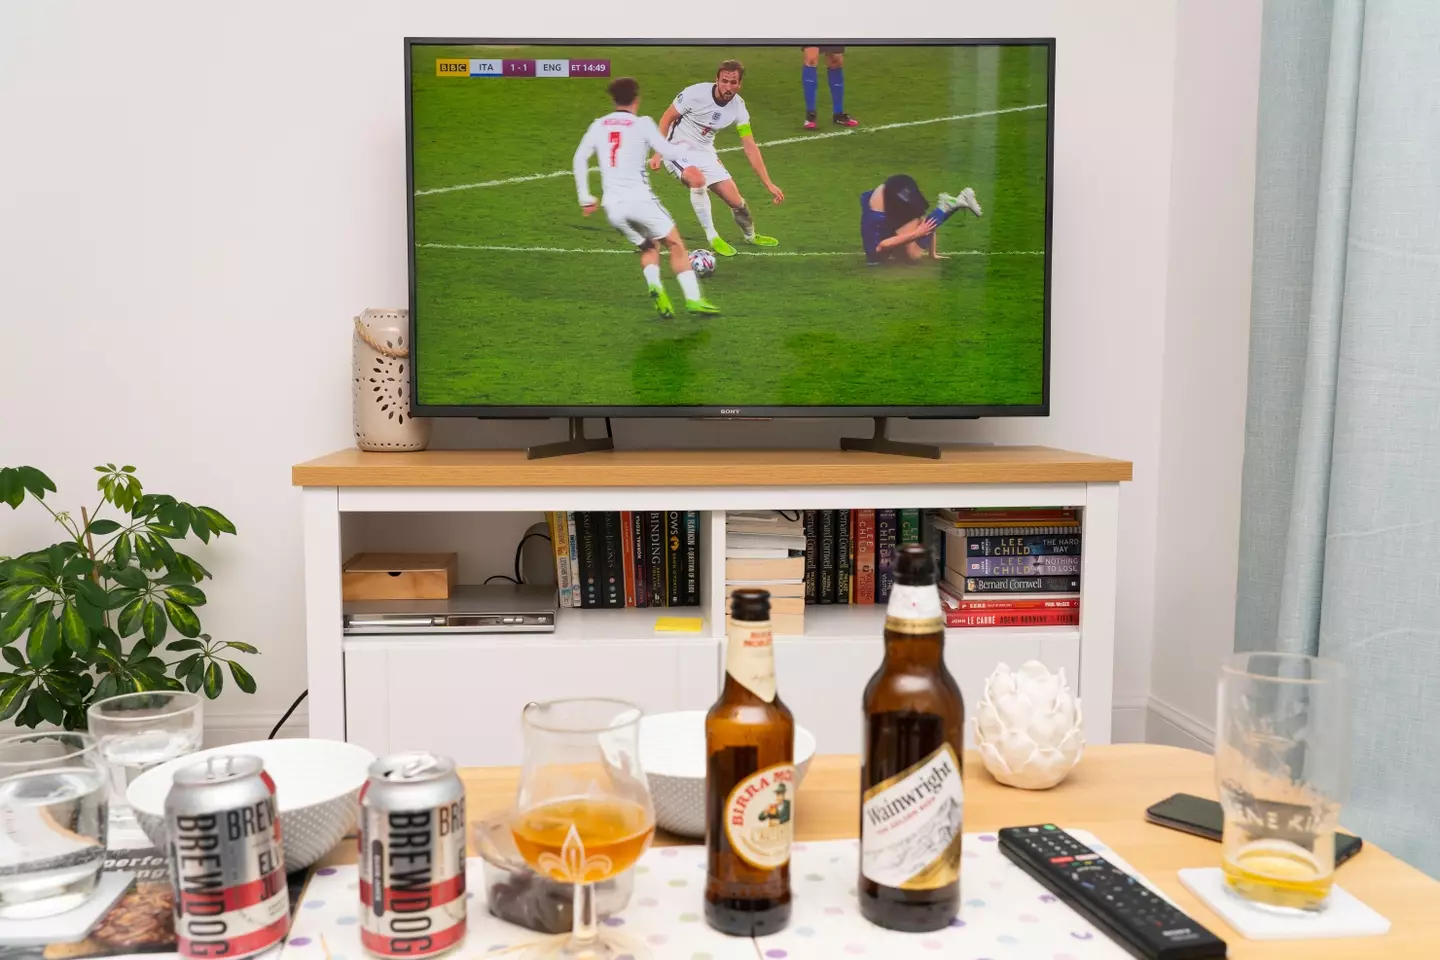 Dreambox offered unauthorised viewing of the Premier League games.